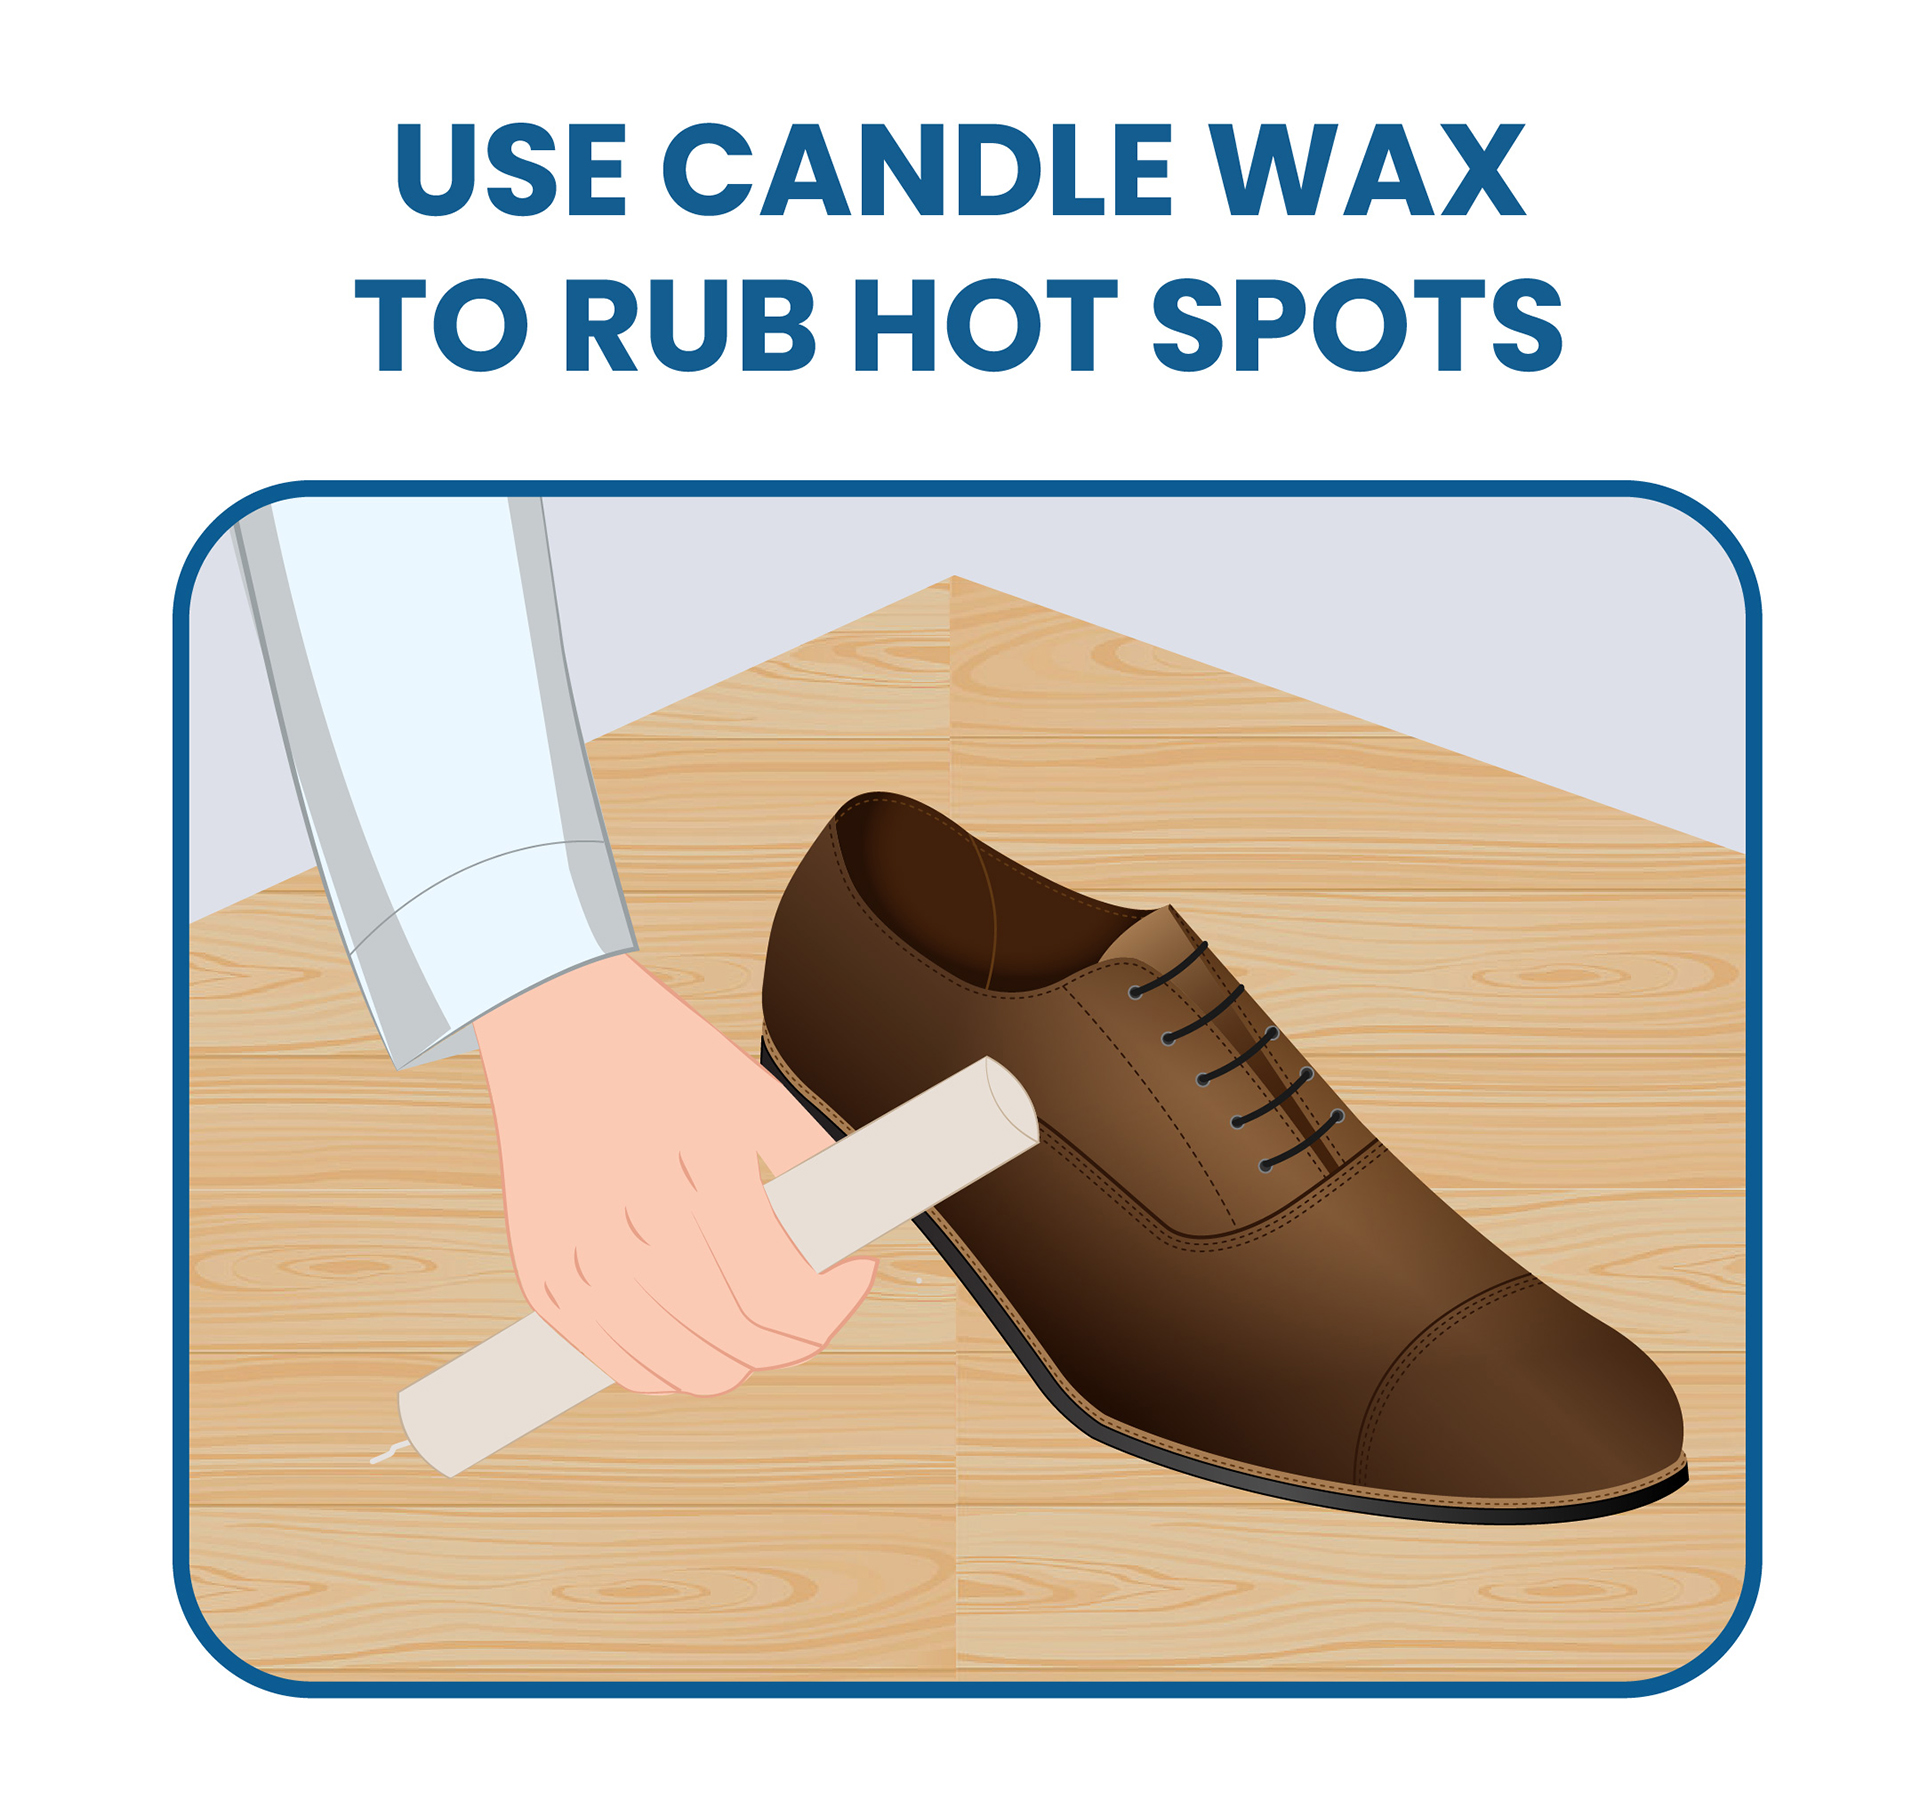 rub dress shoes with candle wax 